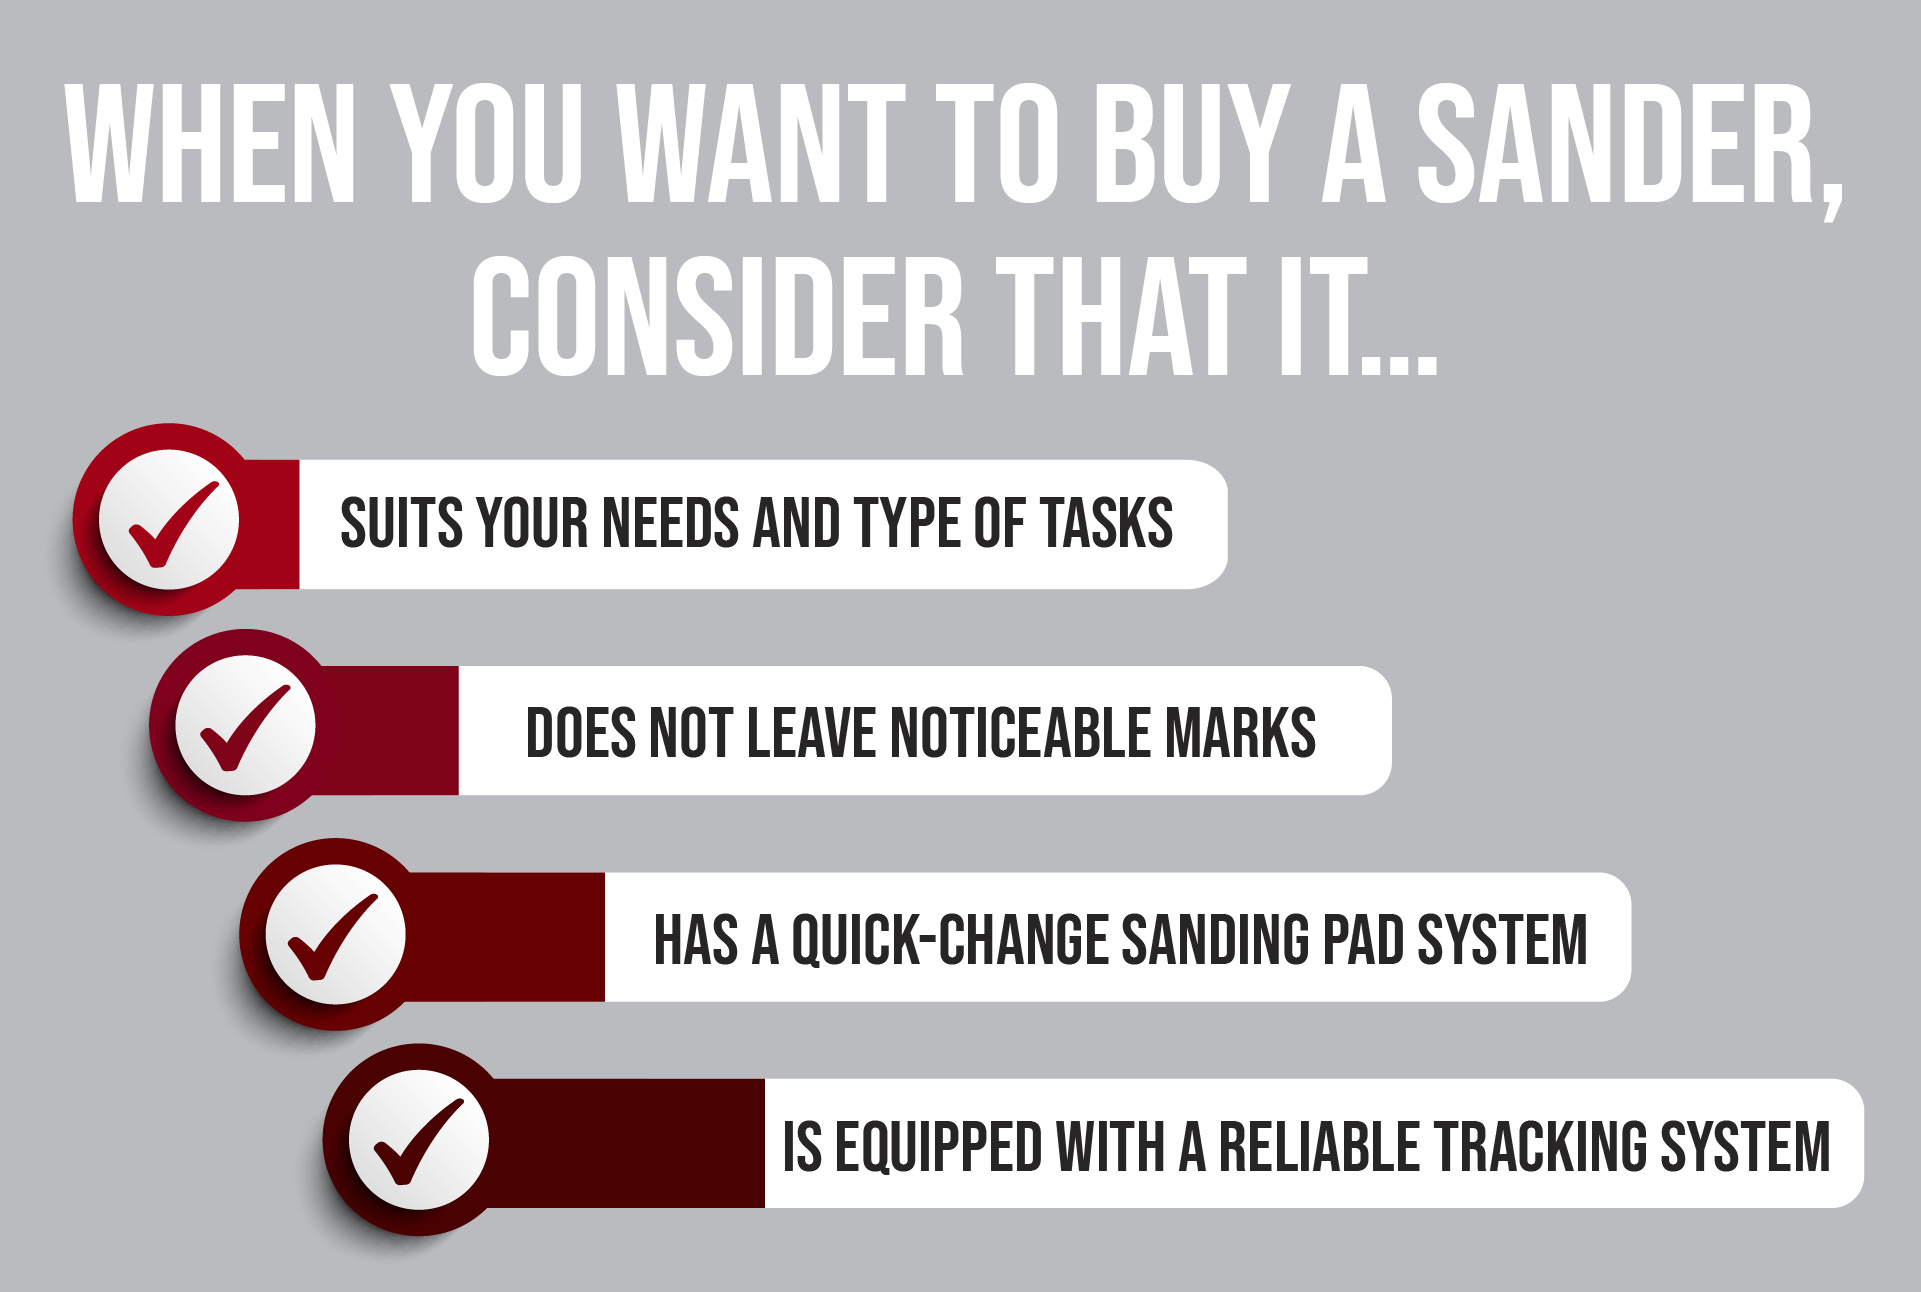 An infographic containing tips for buying the best sanders